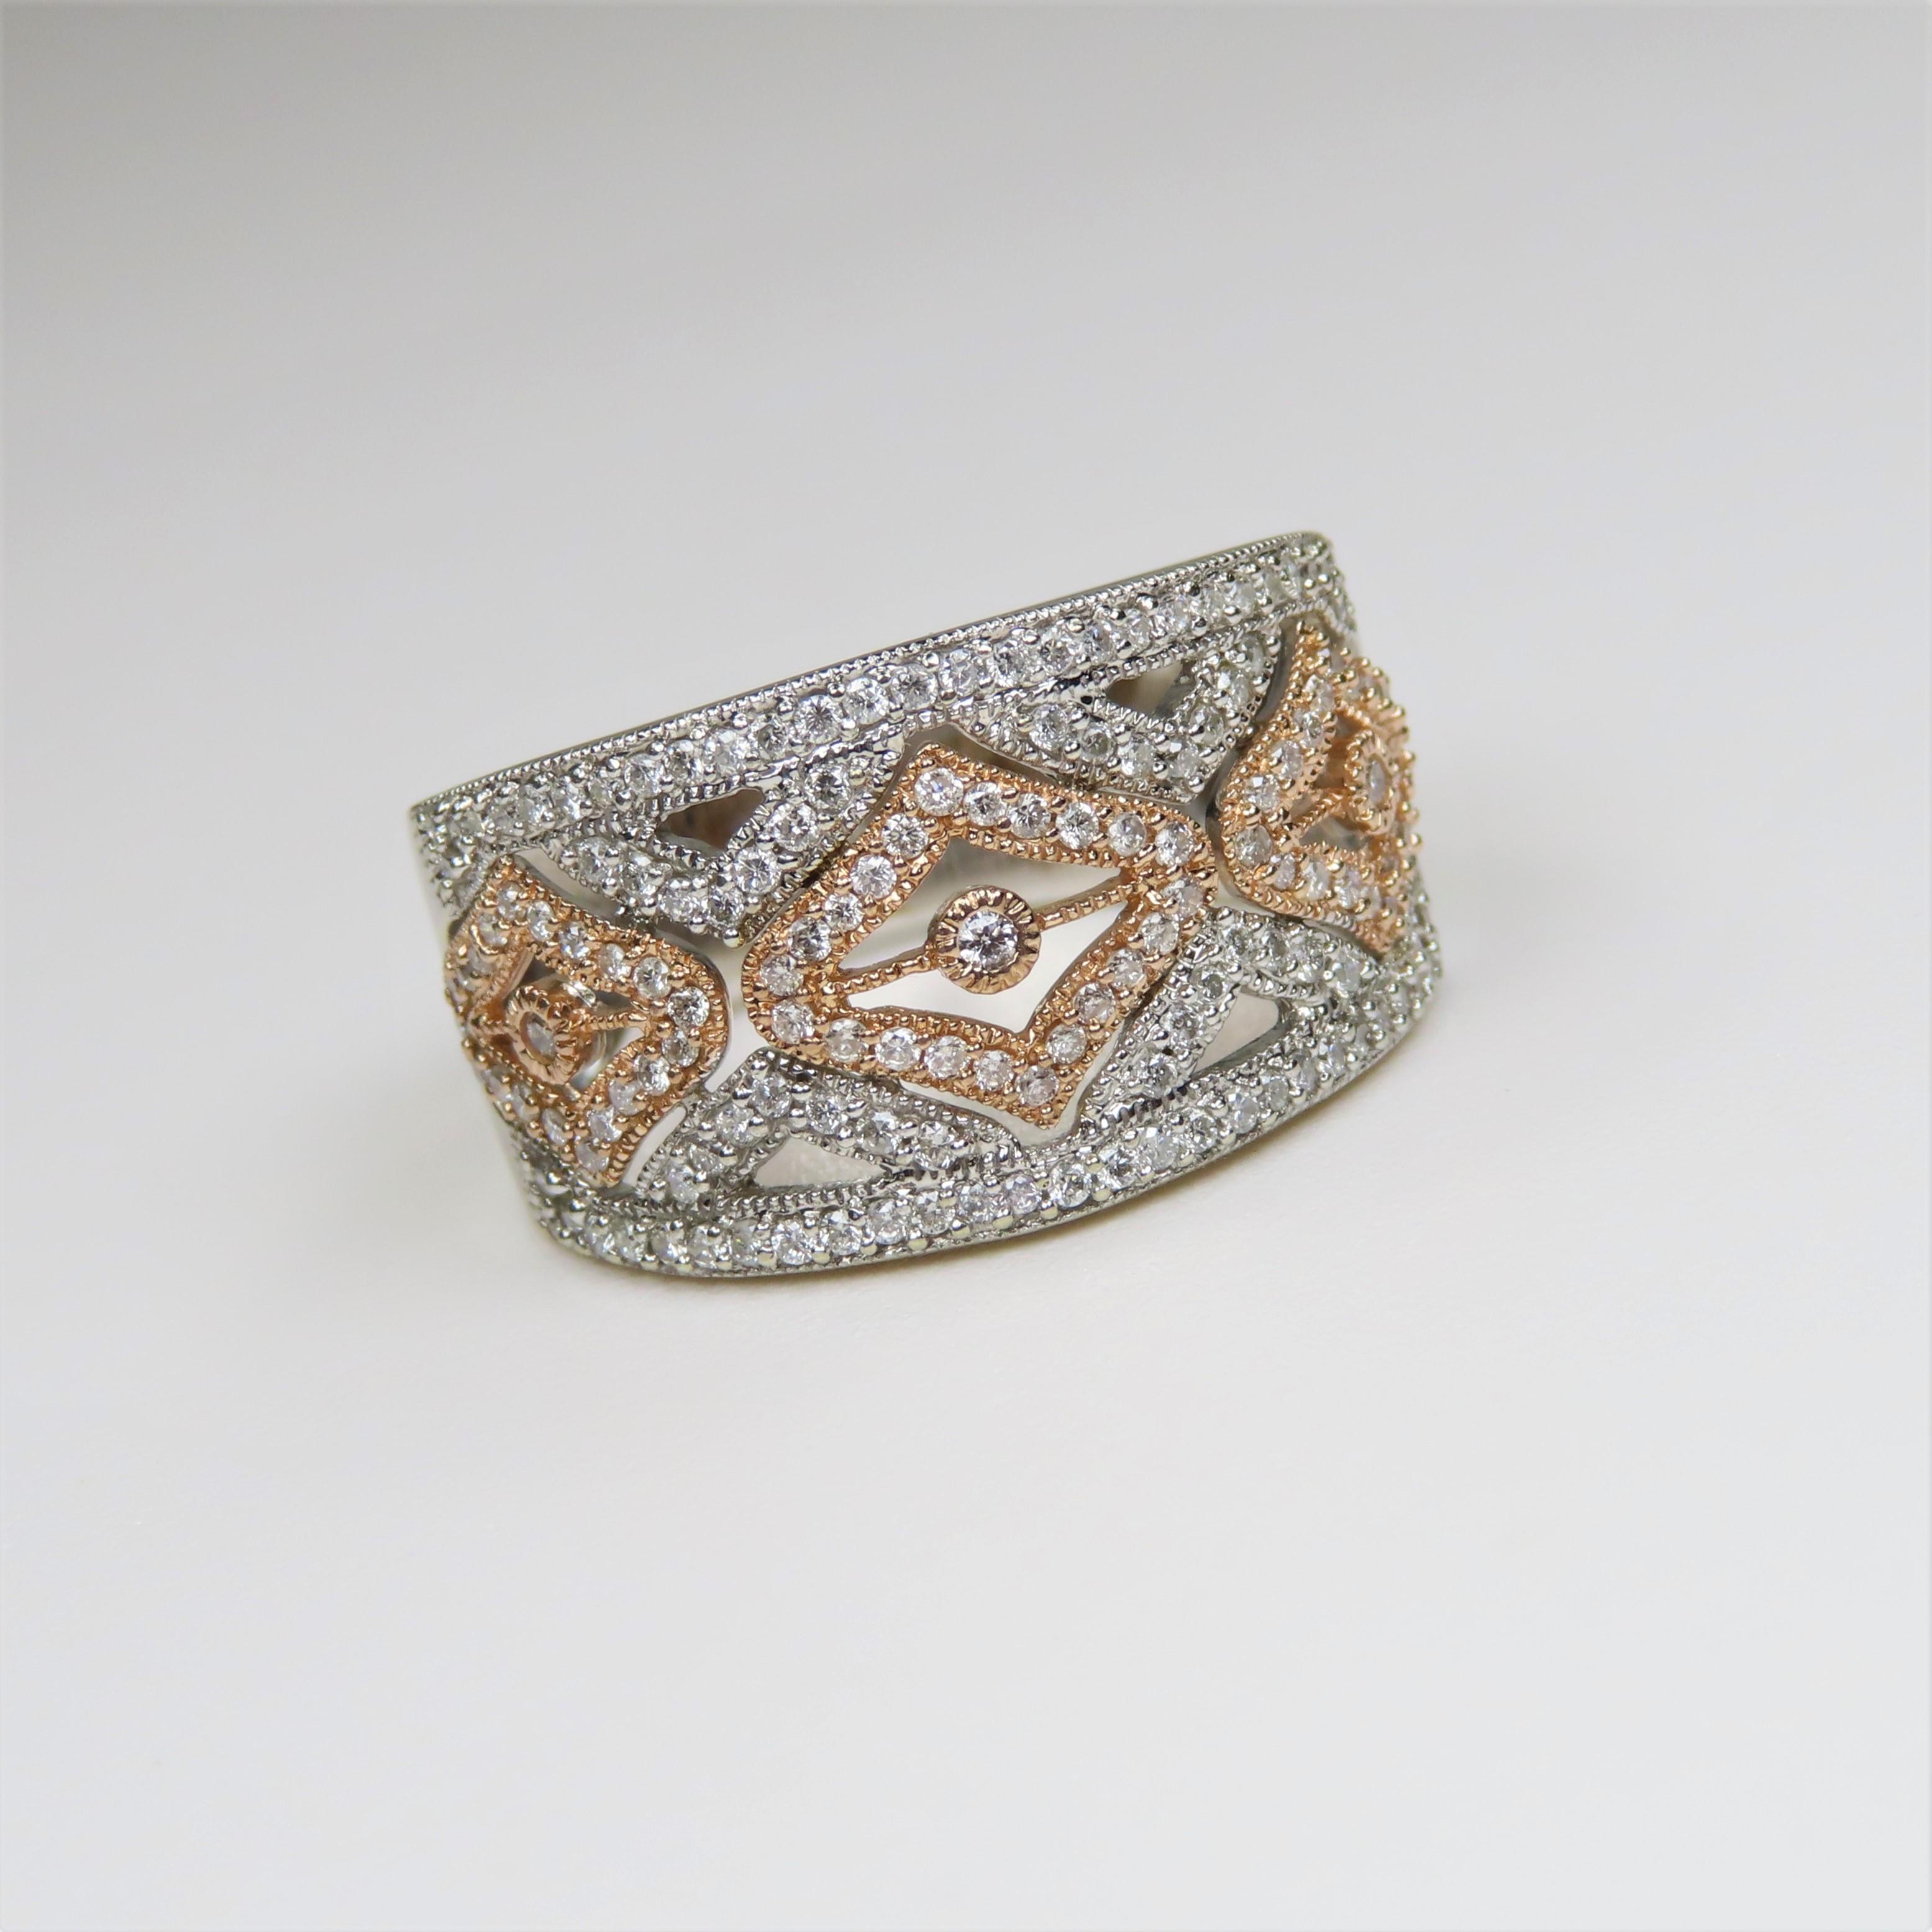 Beautifully Detailed Diamond Ring featuring